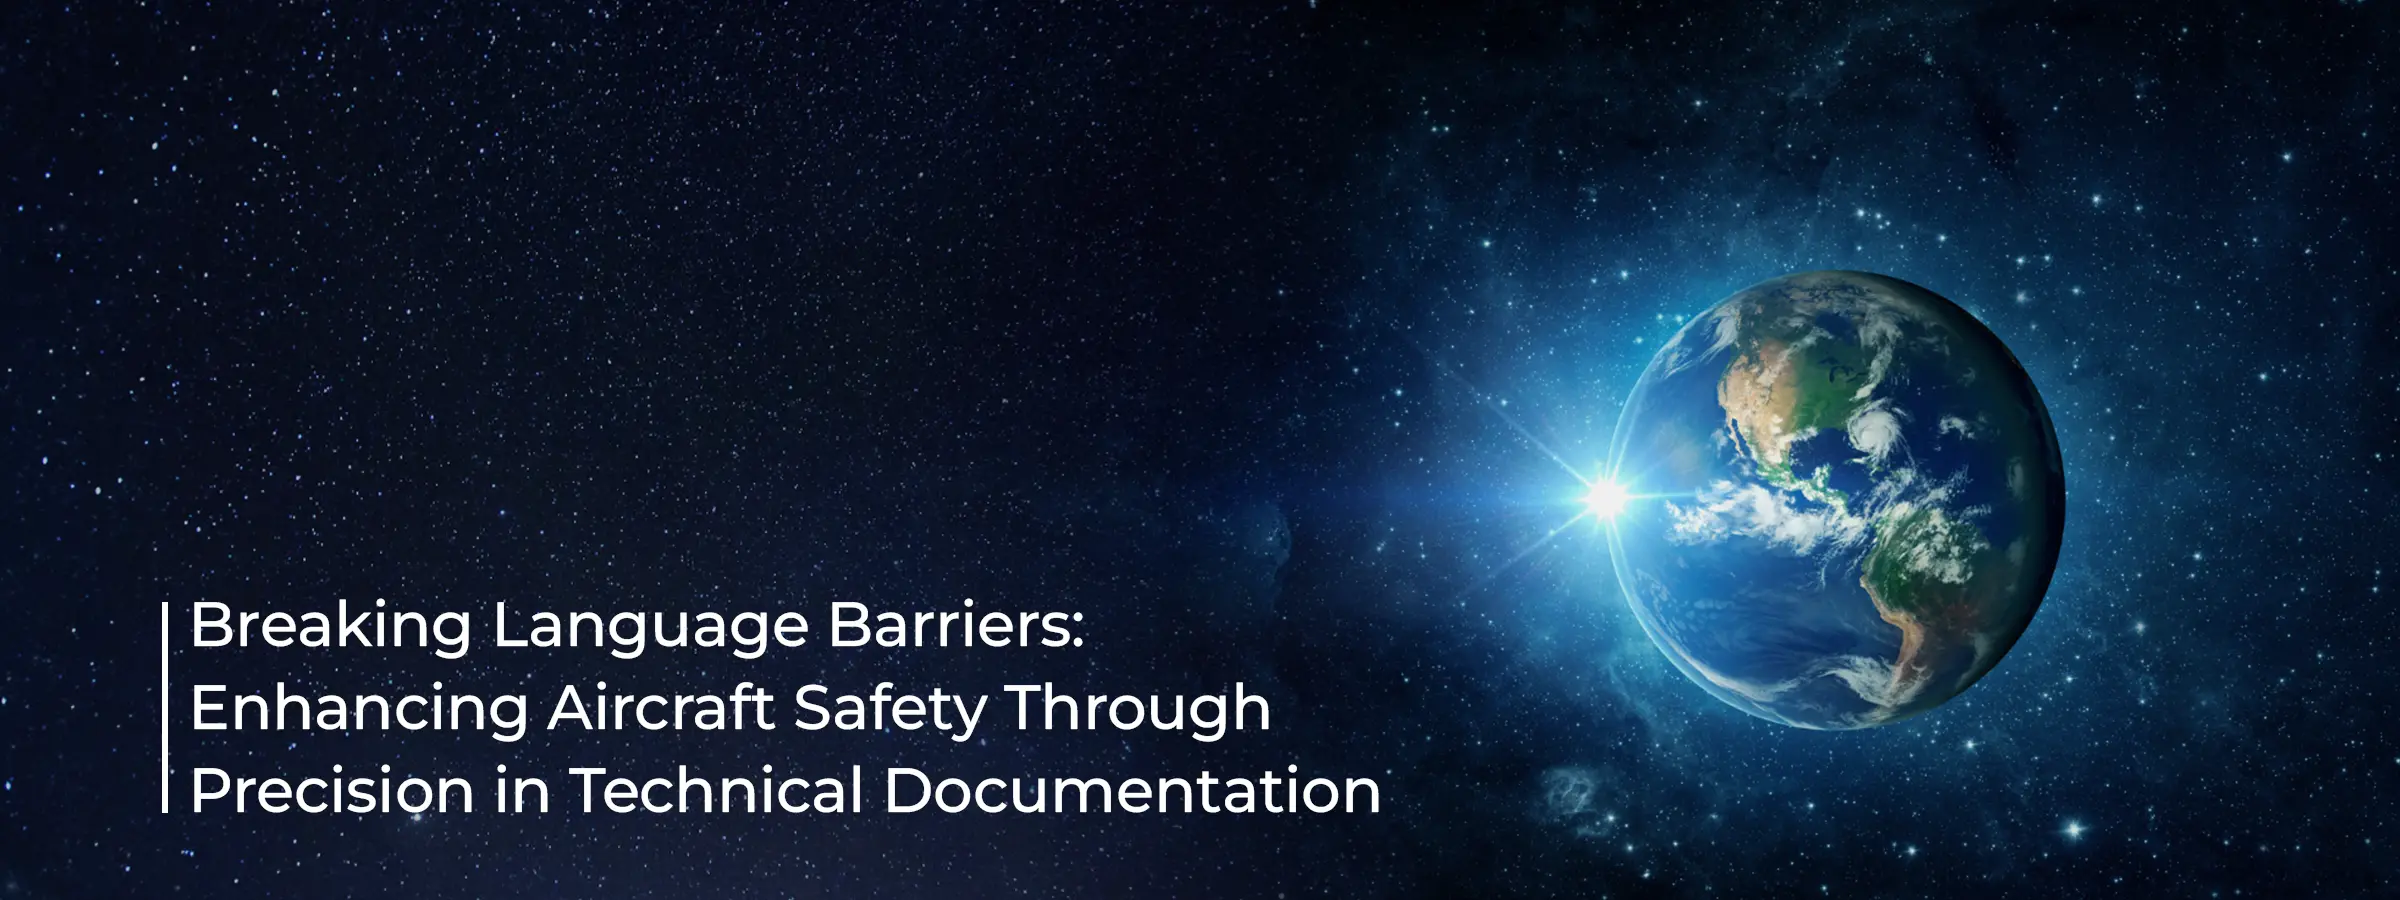 enhancing-aircraft-safety-through-precision-in-technical-documentation